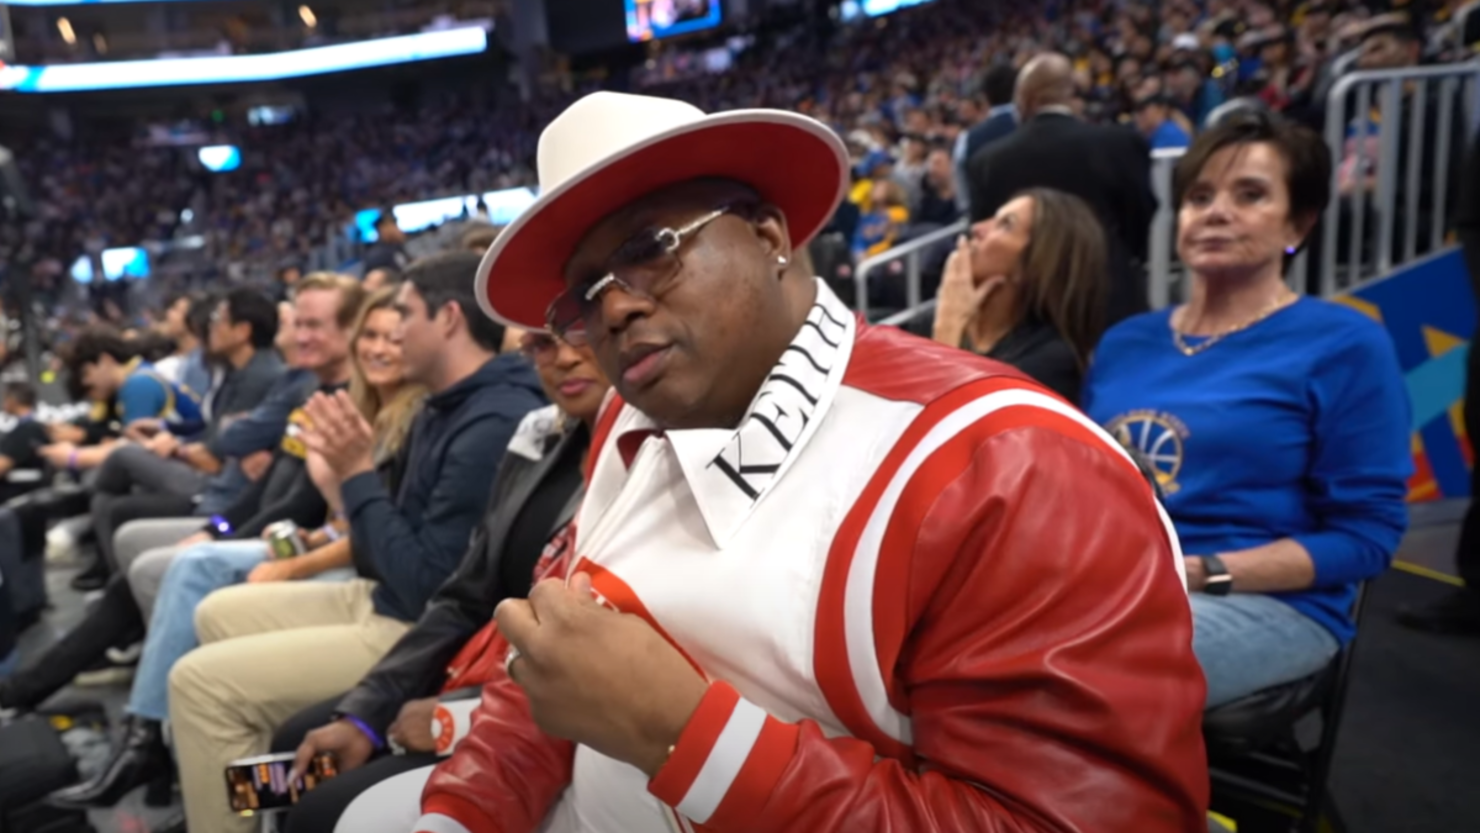 E-40 Kicked Out of Golden 1 Center During Kings-Warriors Playoff Game